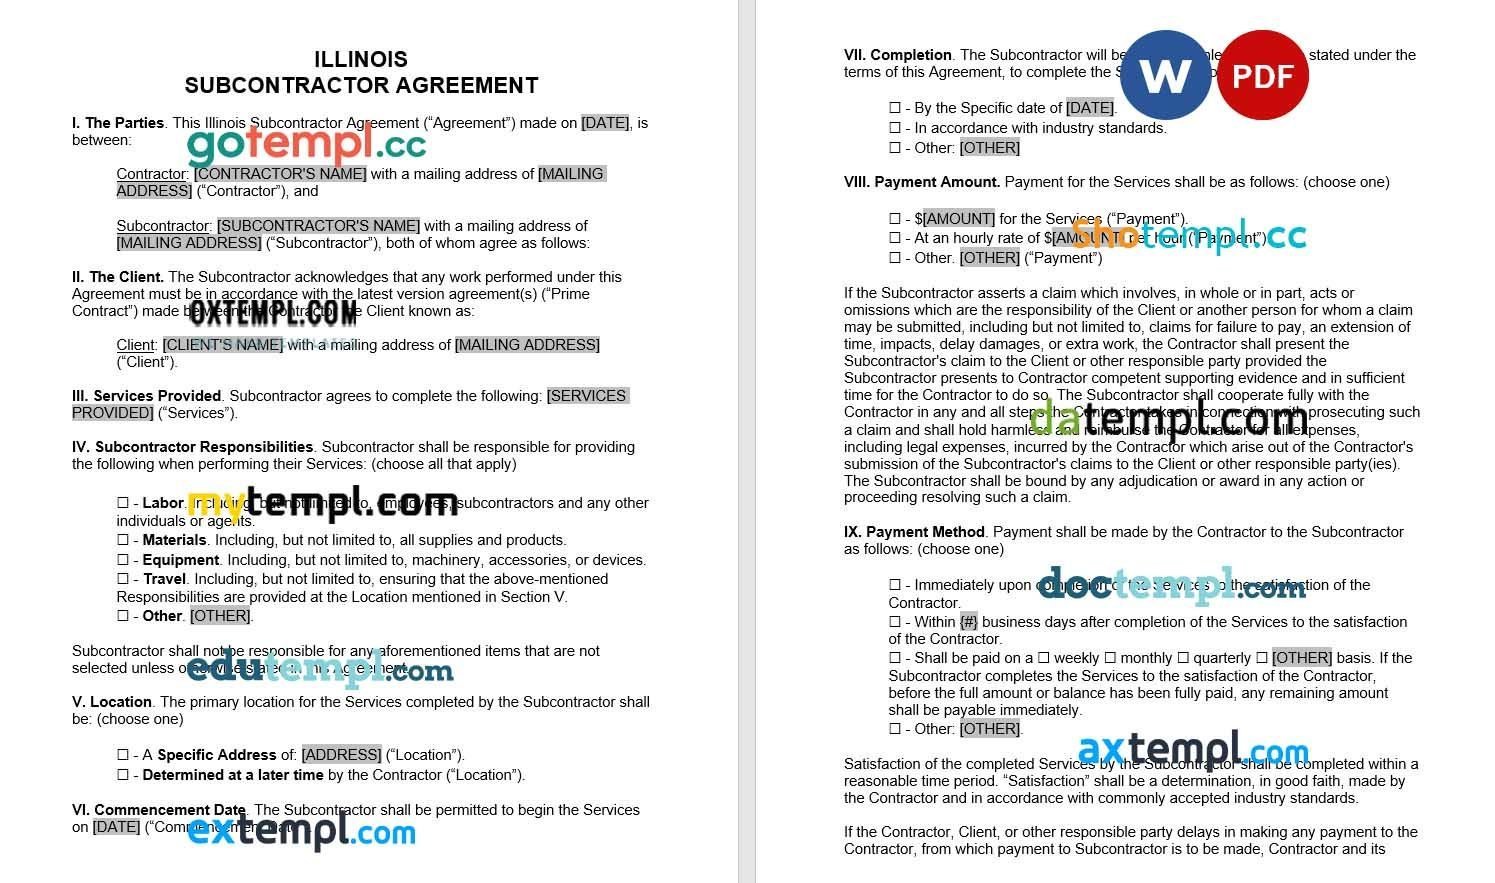 Illinois Subcontractor Agreement Word example, fully editable